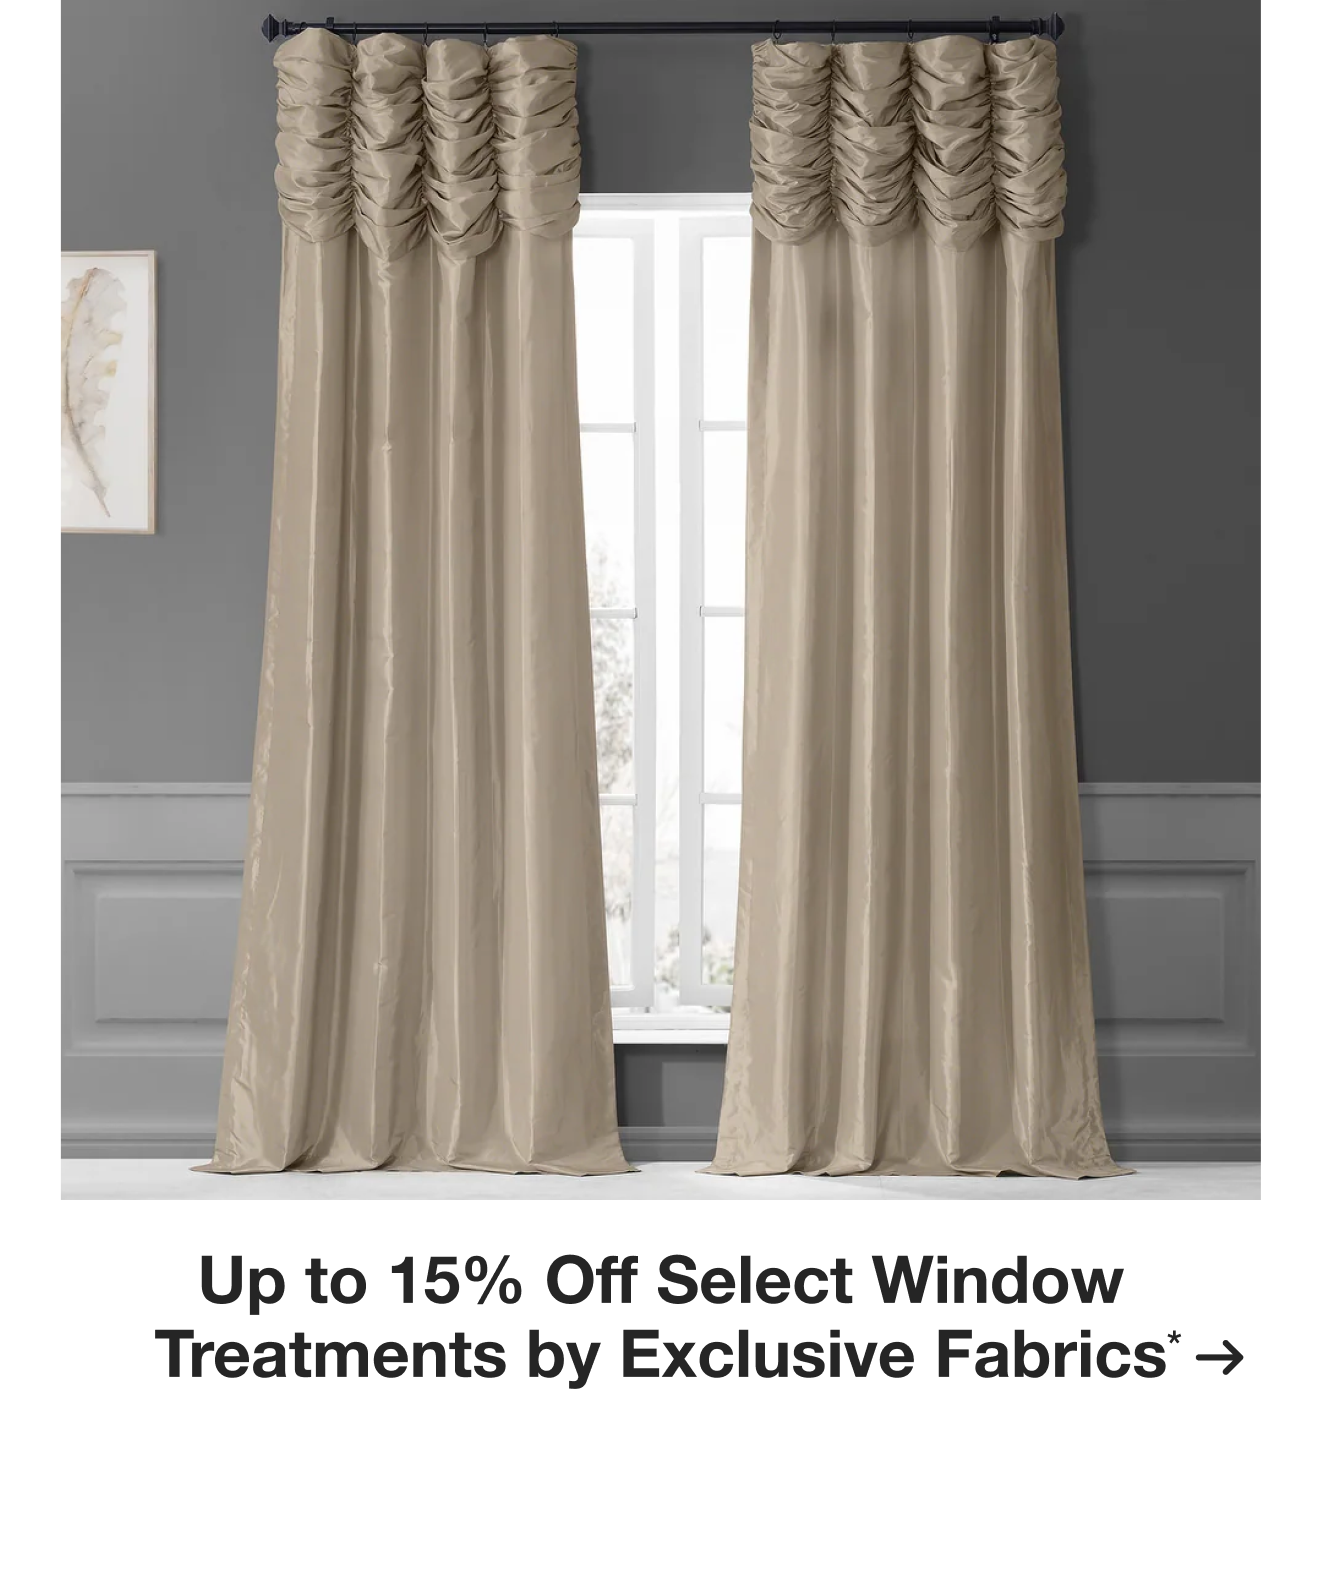 Up to 15% Off Select Window Treatments by Exclusive Fabrics*